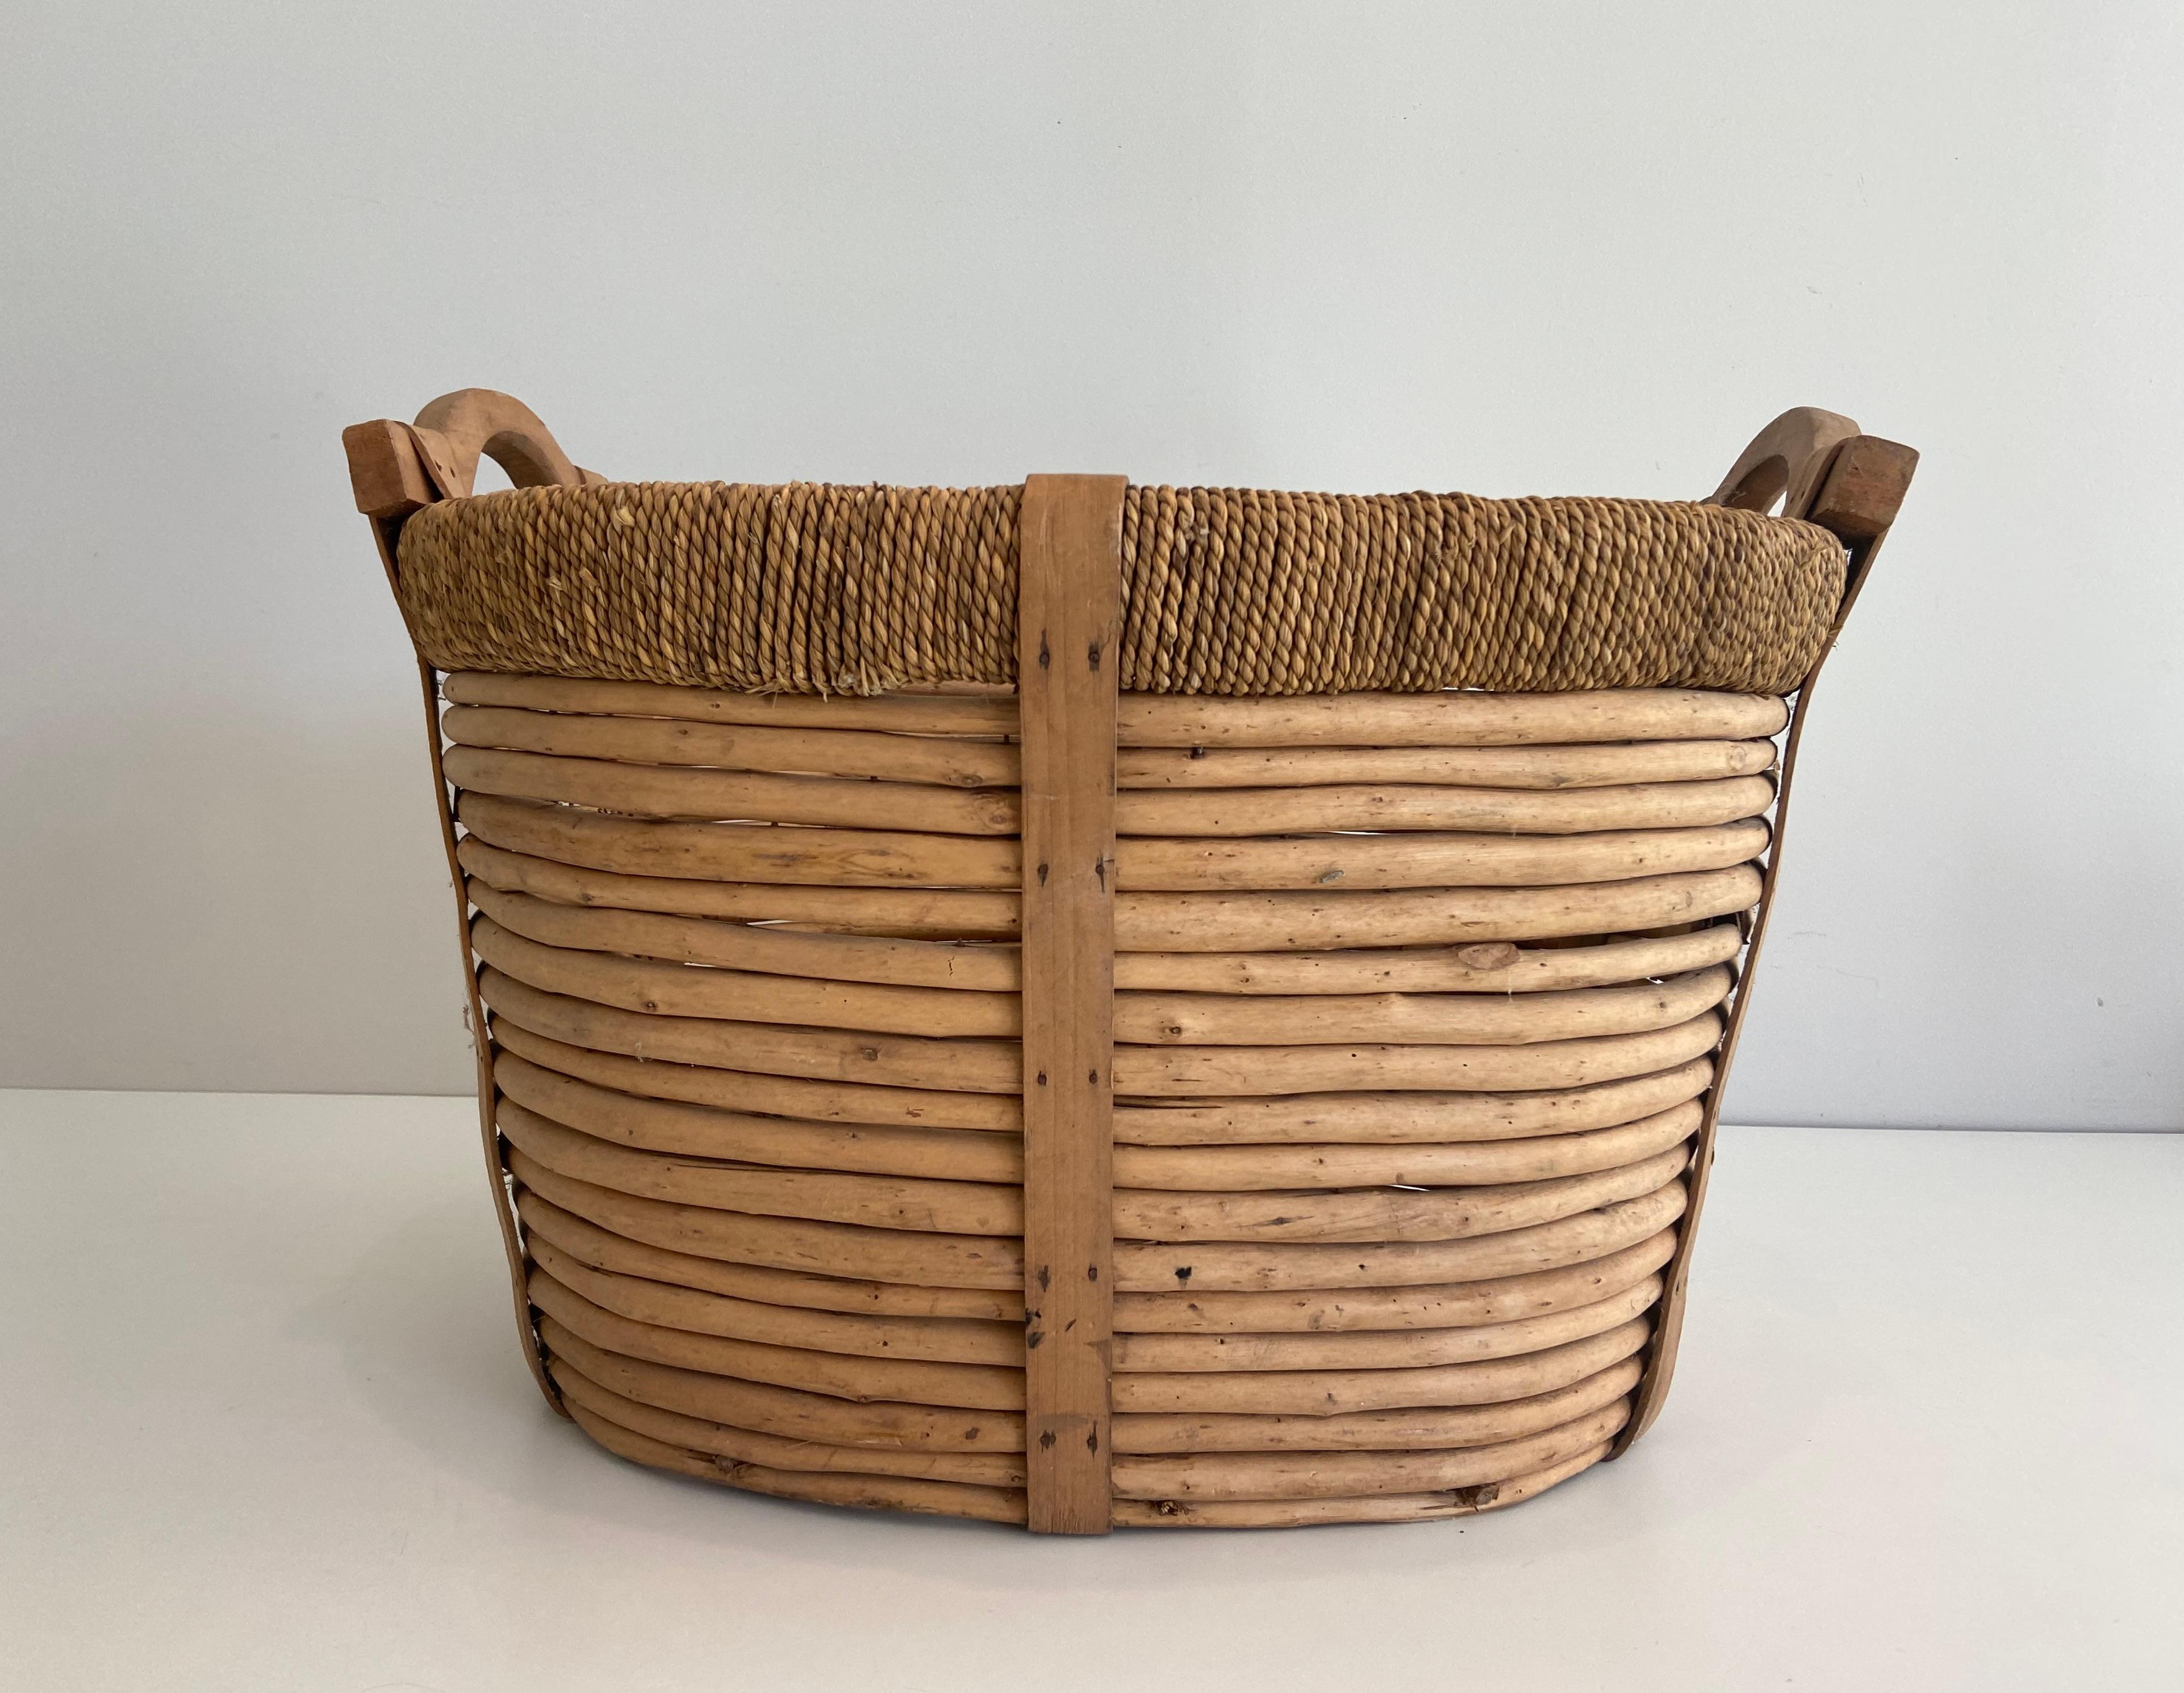 This logs basket is made of rattan, rope and wood. French work. Circa 1950.